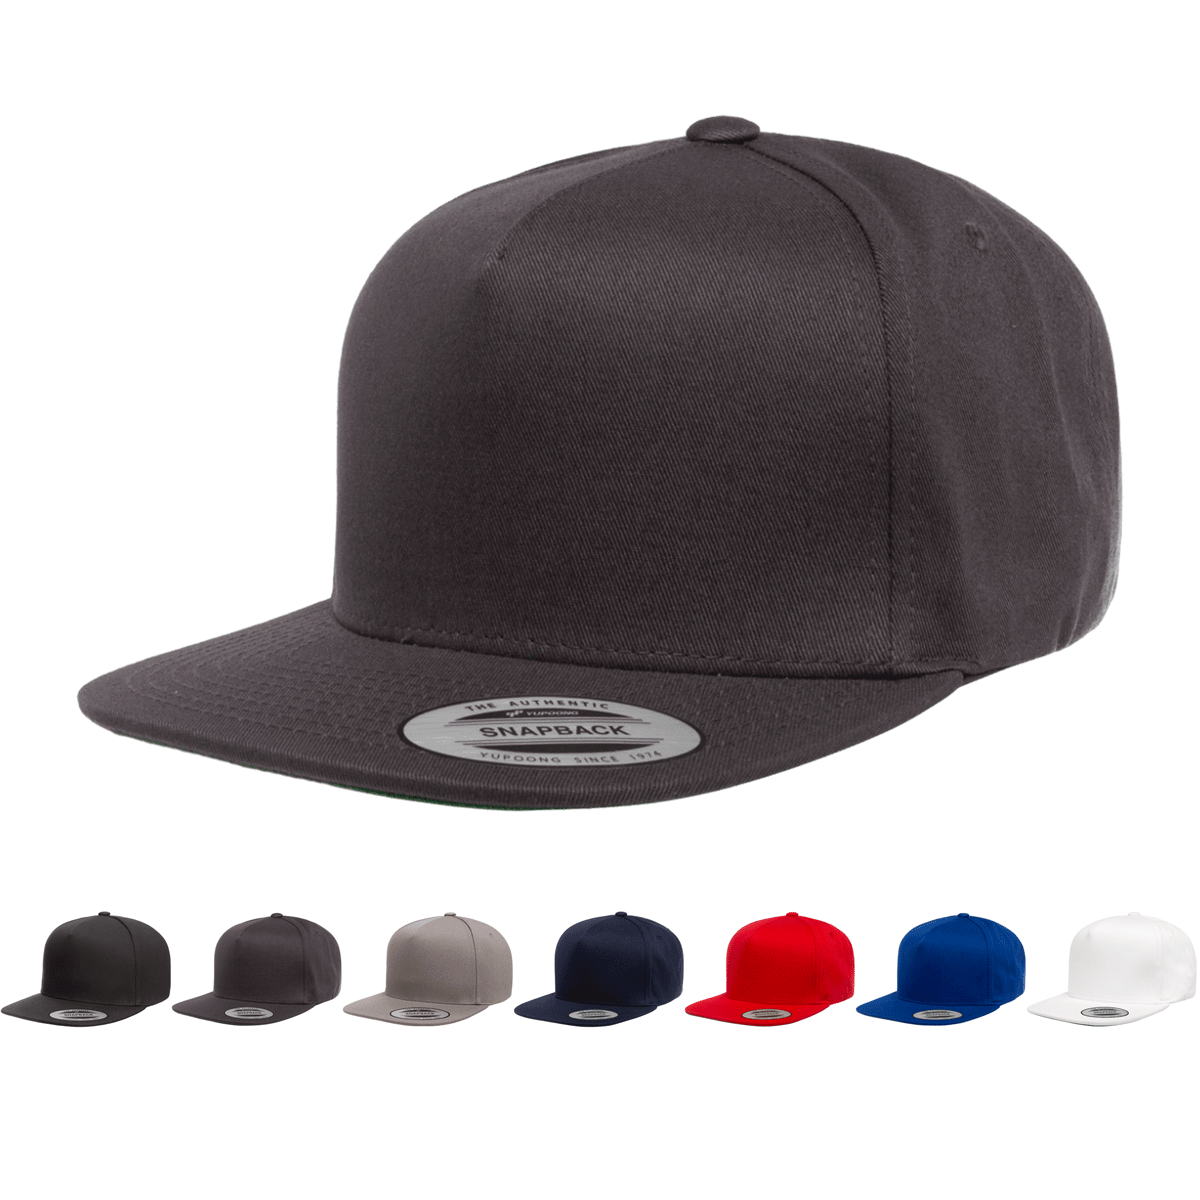 Yupoong 6007 5-Panel Cotton Twill Cap Park Wholesale The – Hat, - Cla Snapback YP Bill Flat